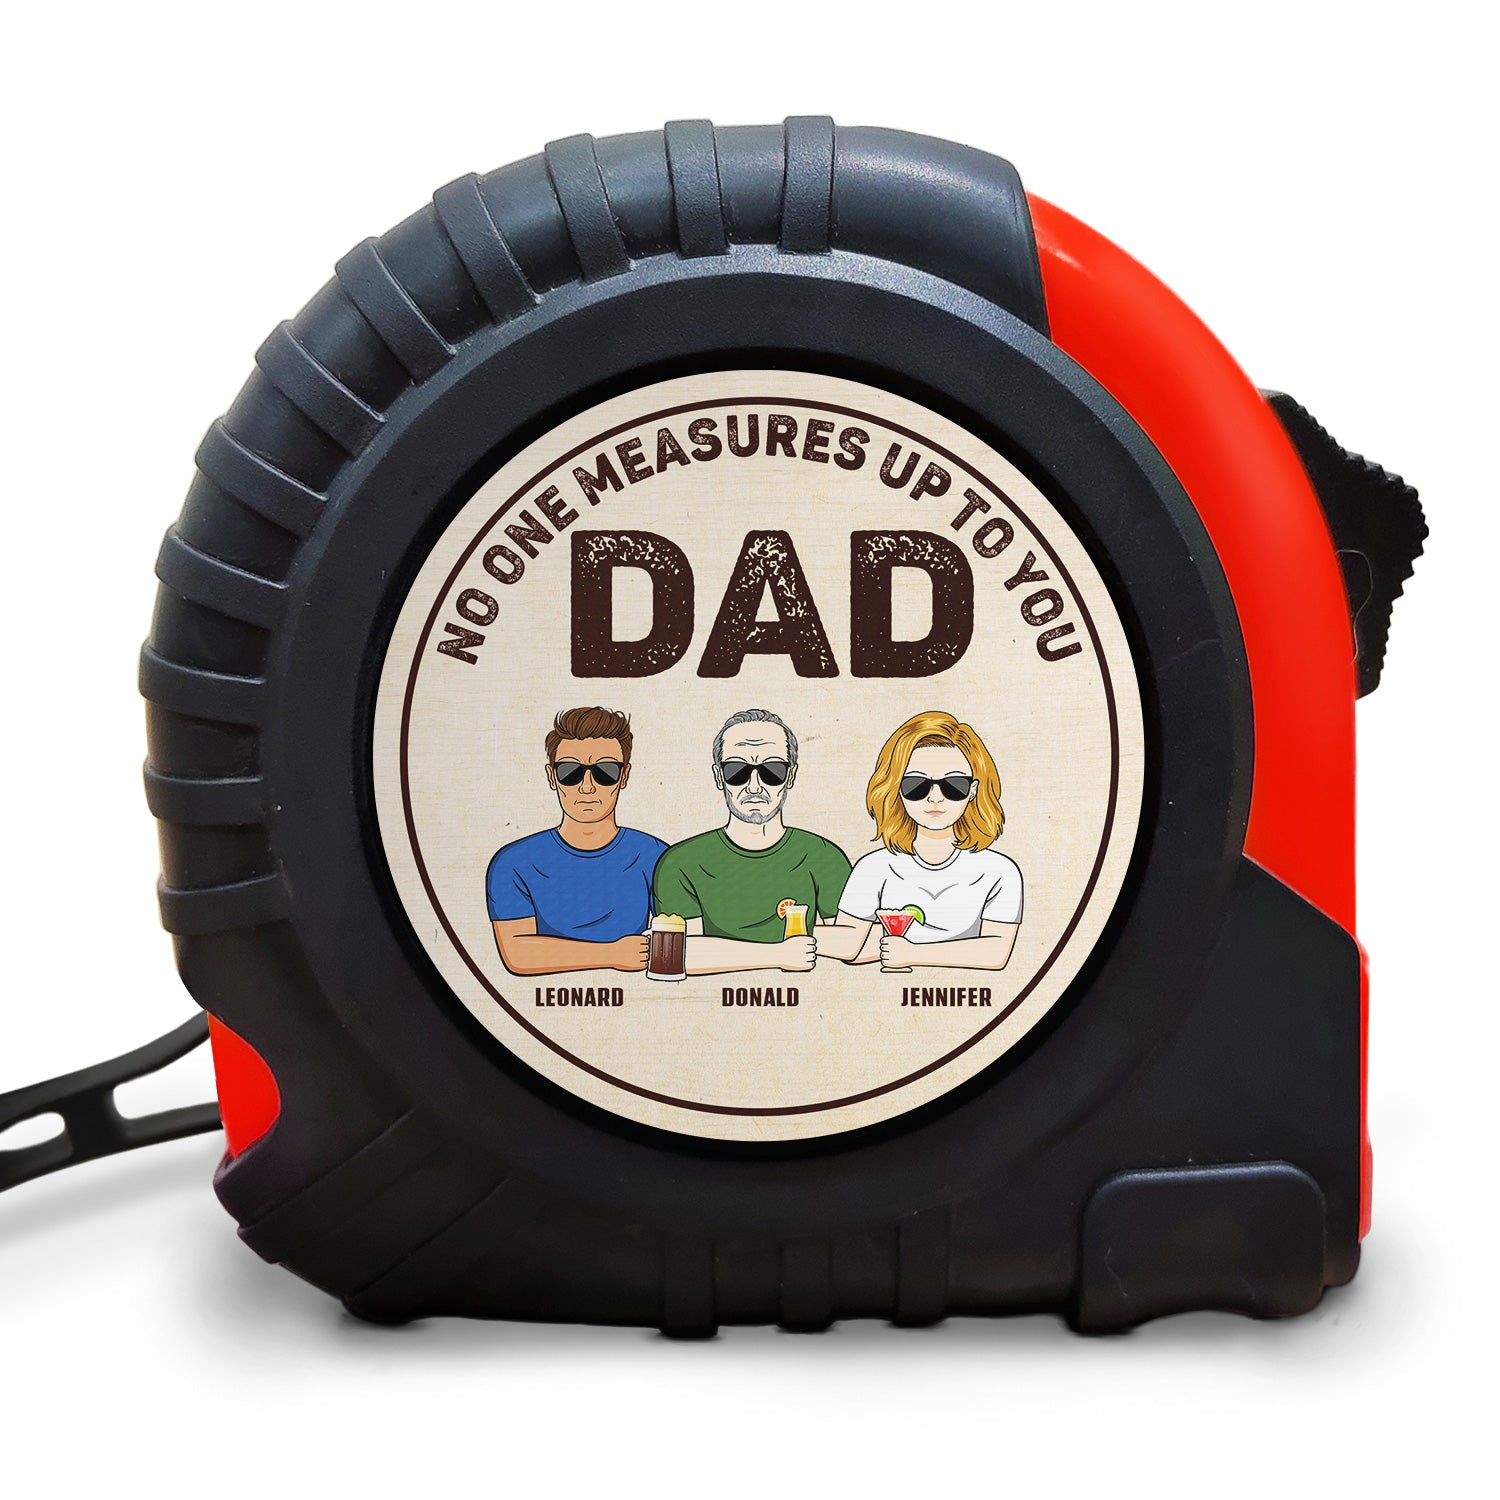 Dad No One Measures Up To You - Birthday, Loving Gift For Daddy, Father, Grandfather, Grandpa - Personalized Tape Measure